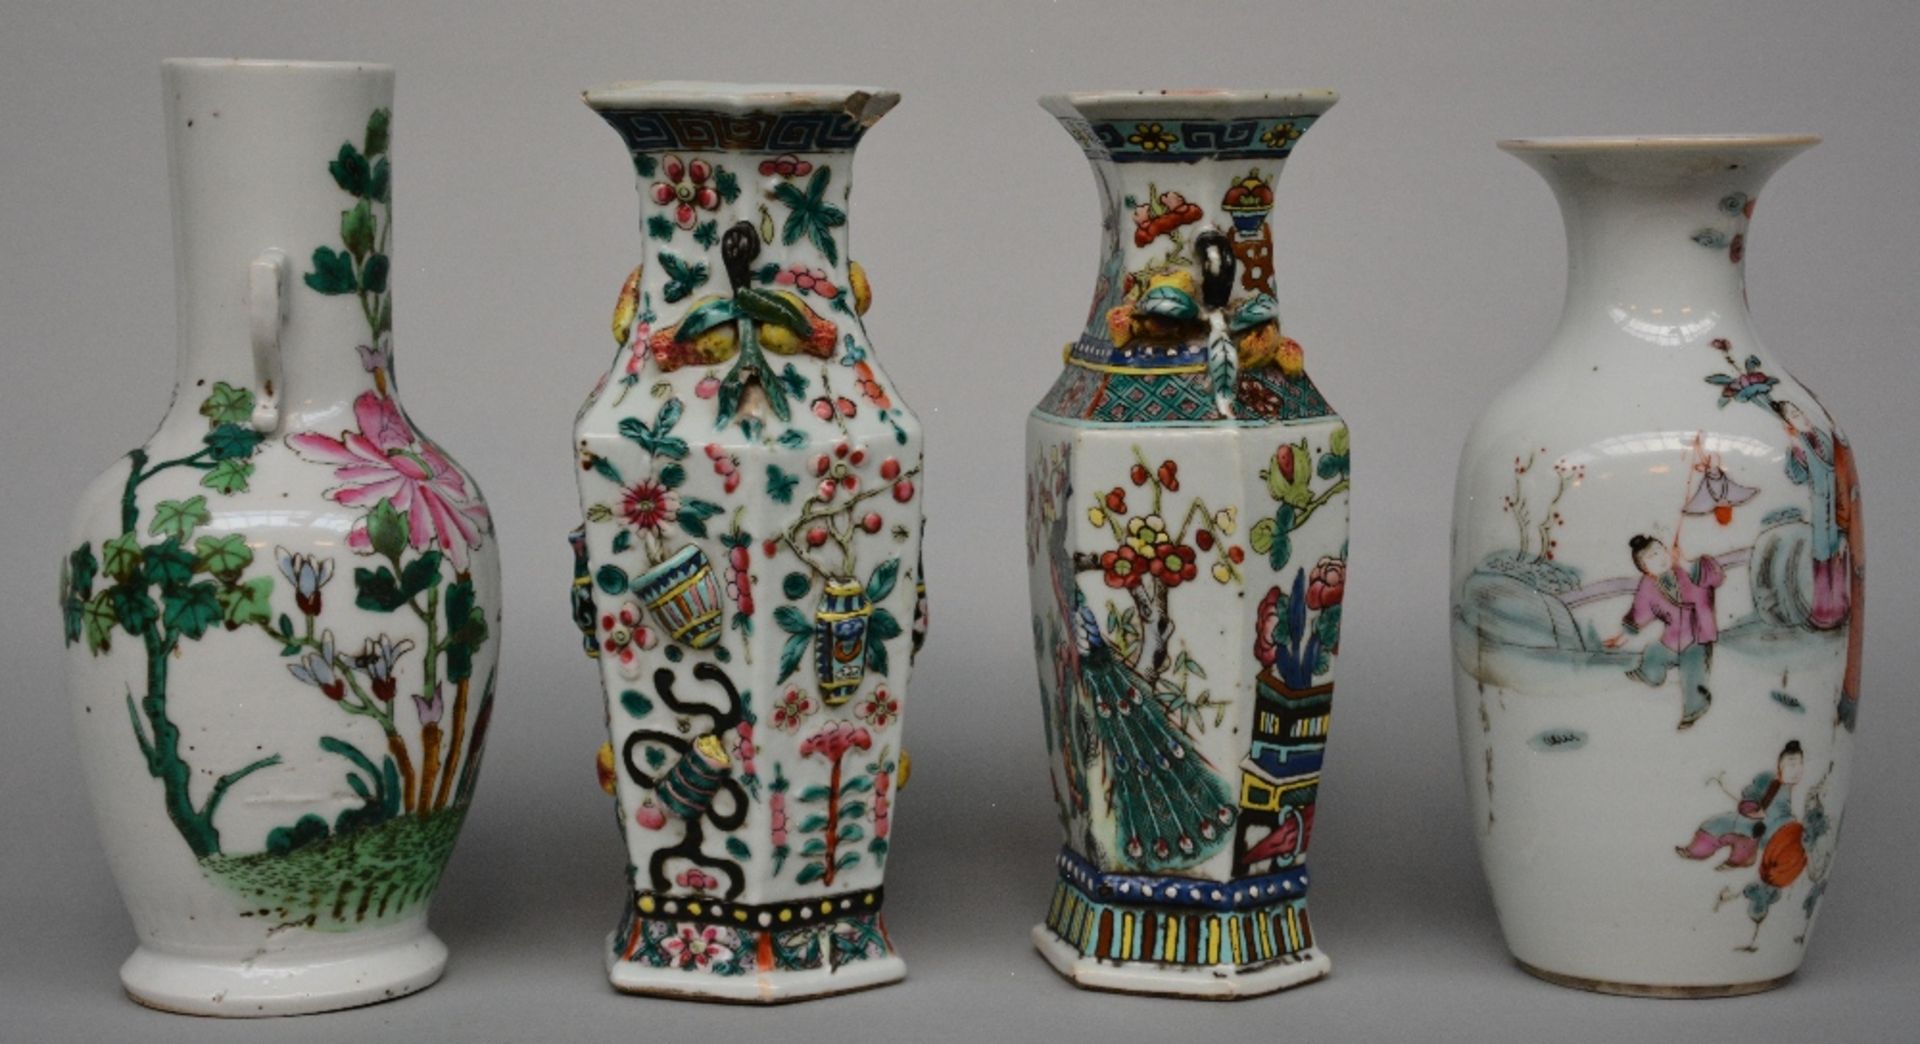 Four Chinese polychrome decorated vases depicting figures, birds, a deer and other symbols, H 22 -24 - Bild 4 aus 7